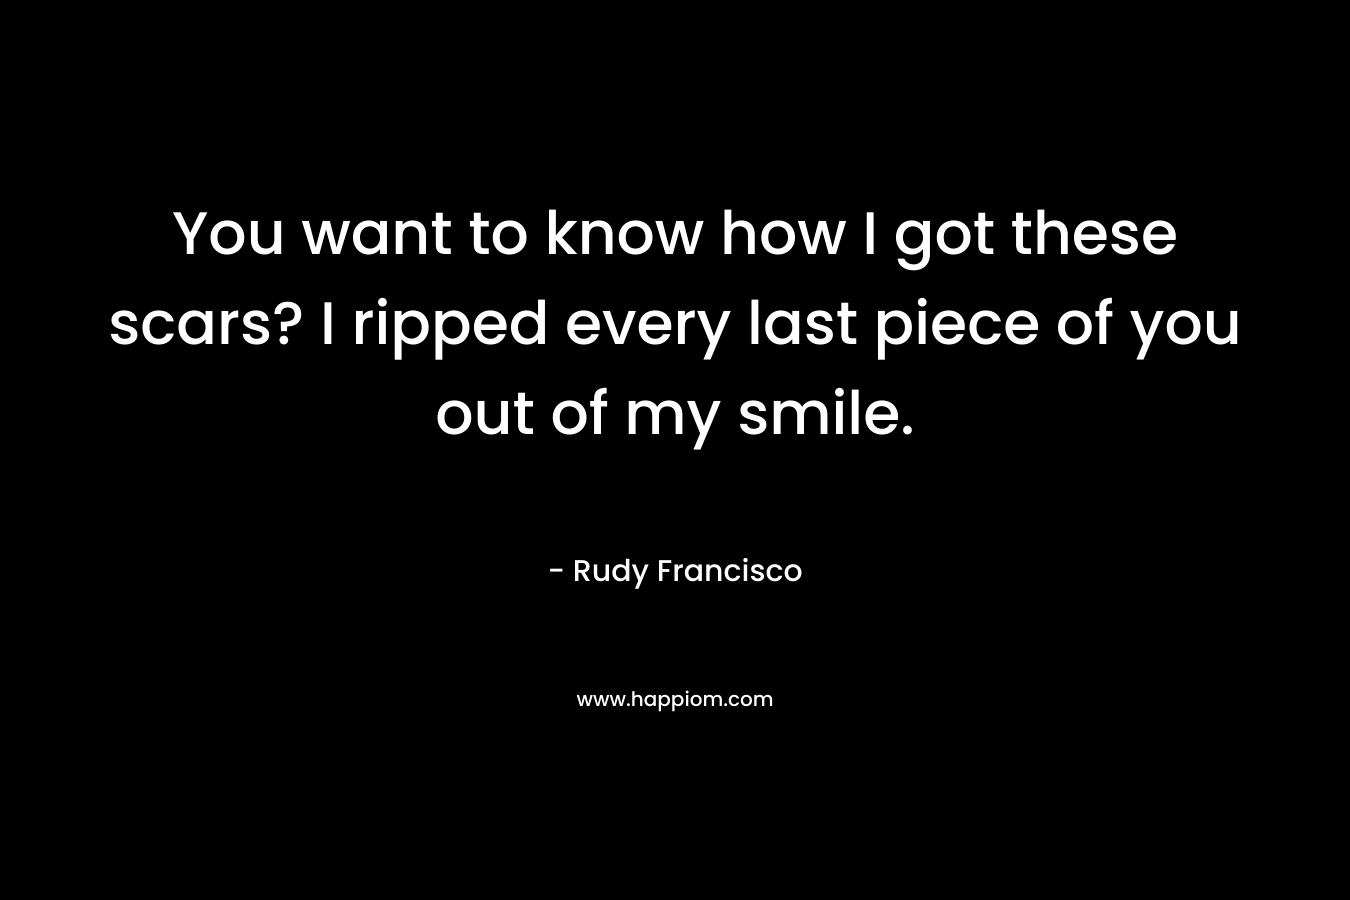 You want to know how I got these scars? I ripped every last piece of you out of my smile. – Rudy Francisco